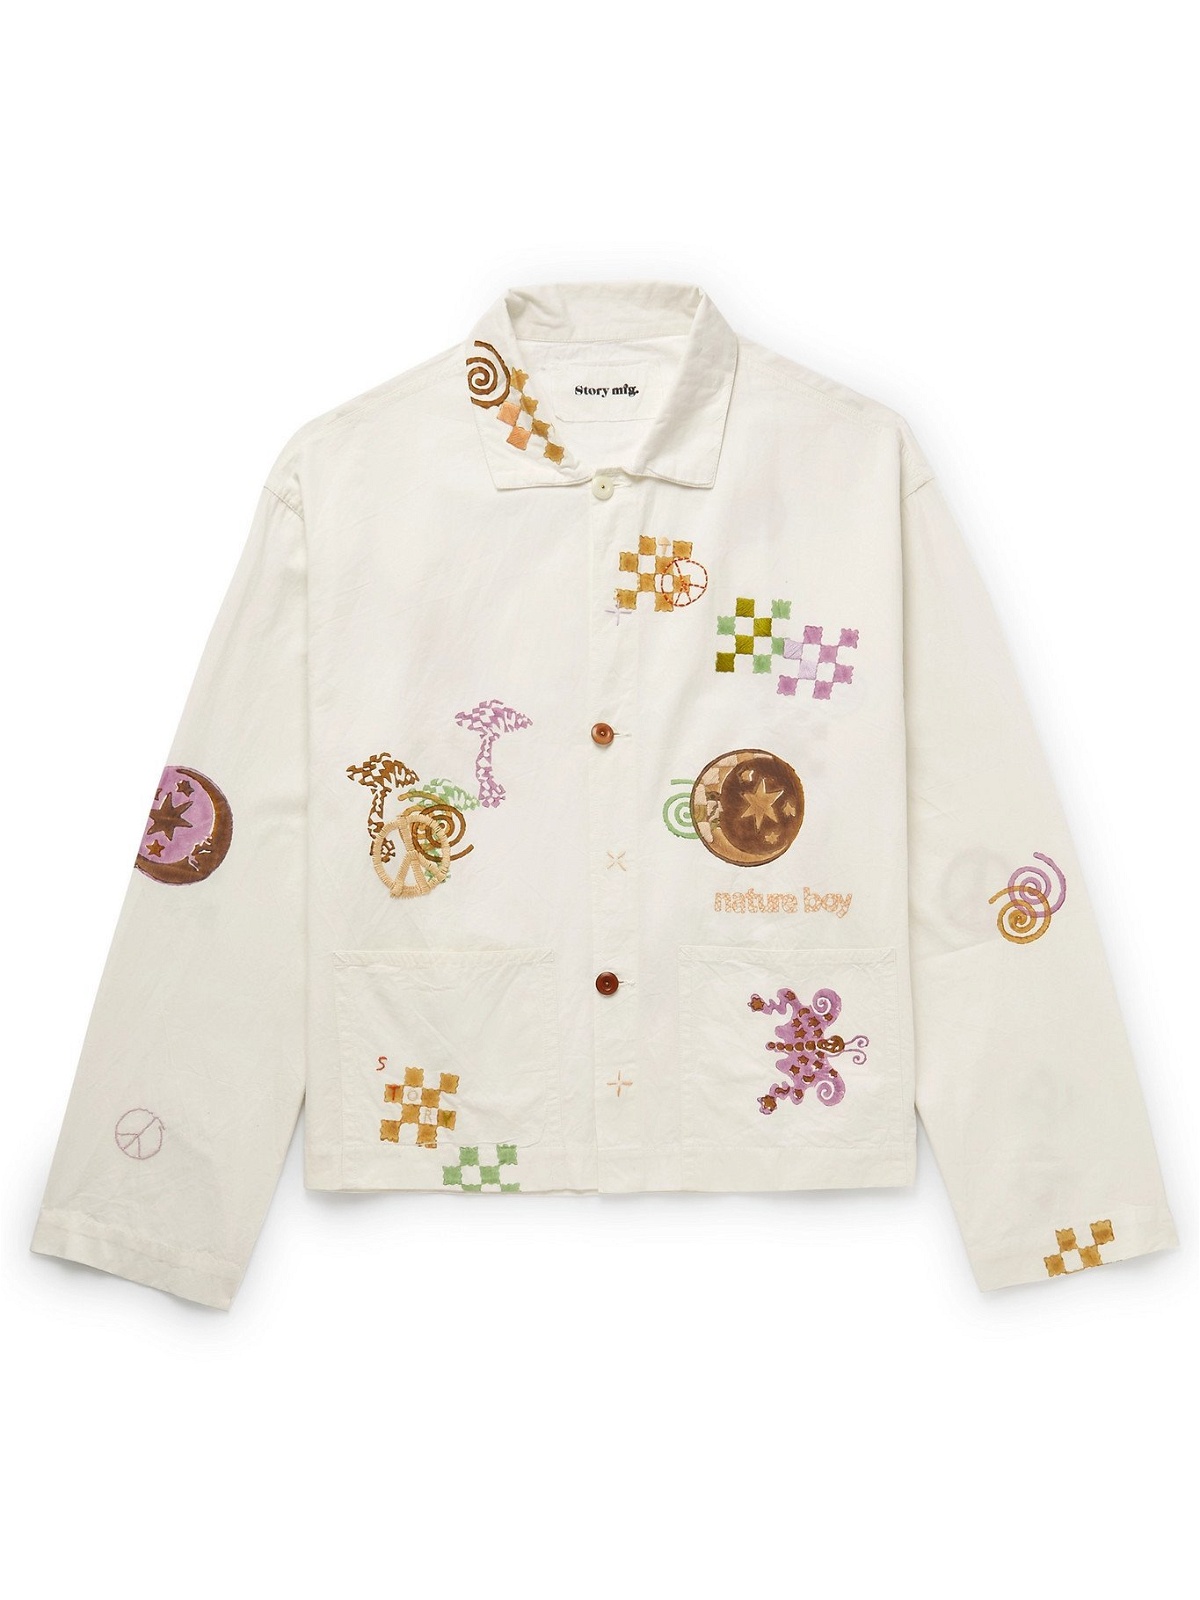 STORY MFG. - Short On Time Embroidered Printed Organic Cotton Overshirt -  Neutrals - S Story Mfg.